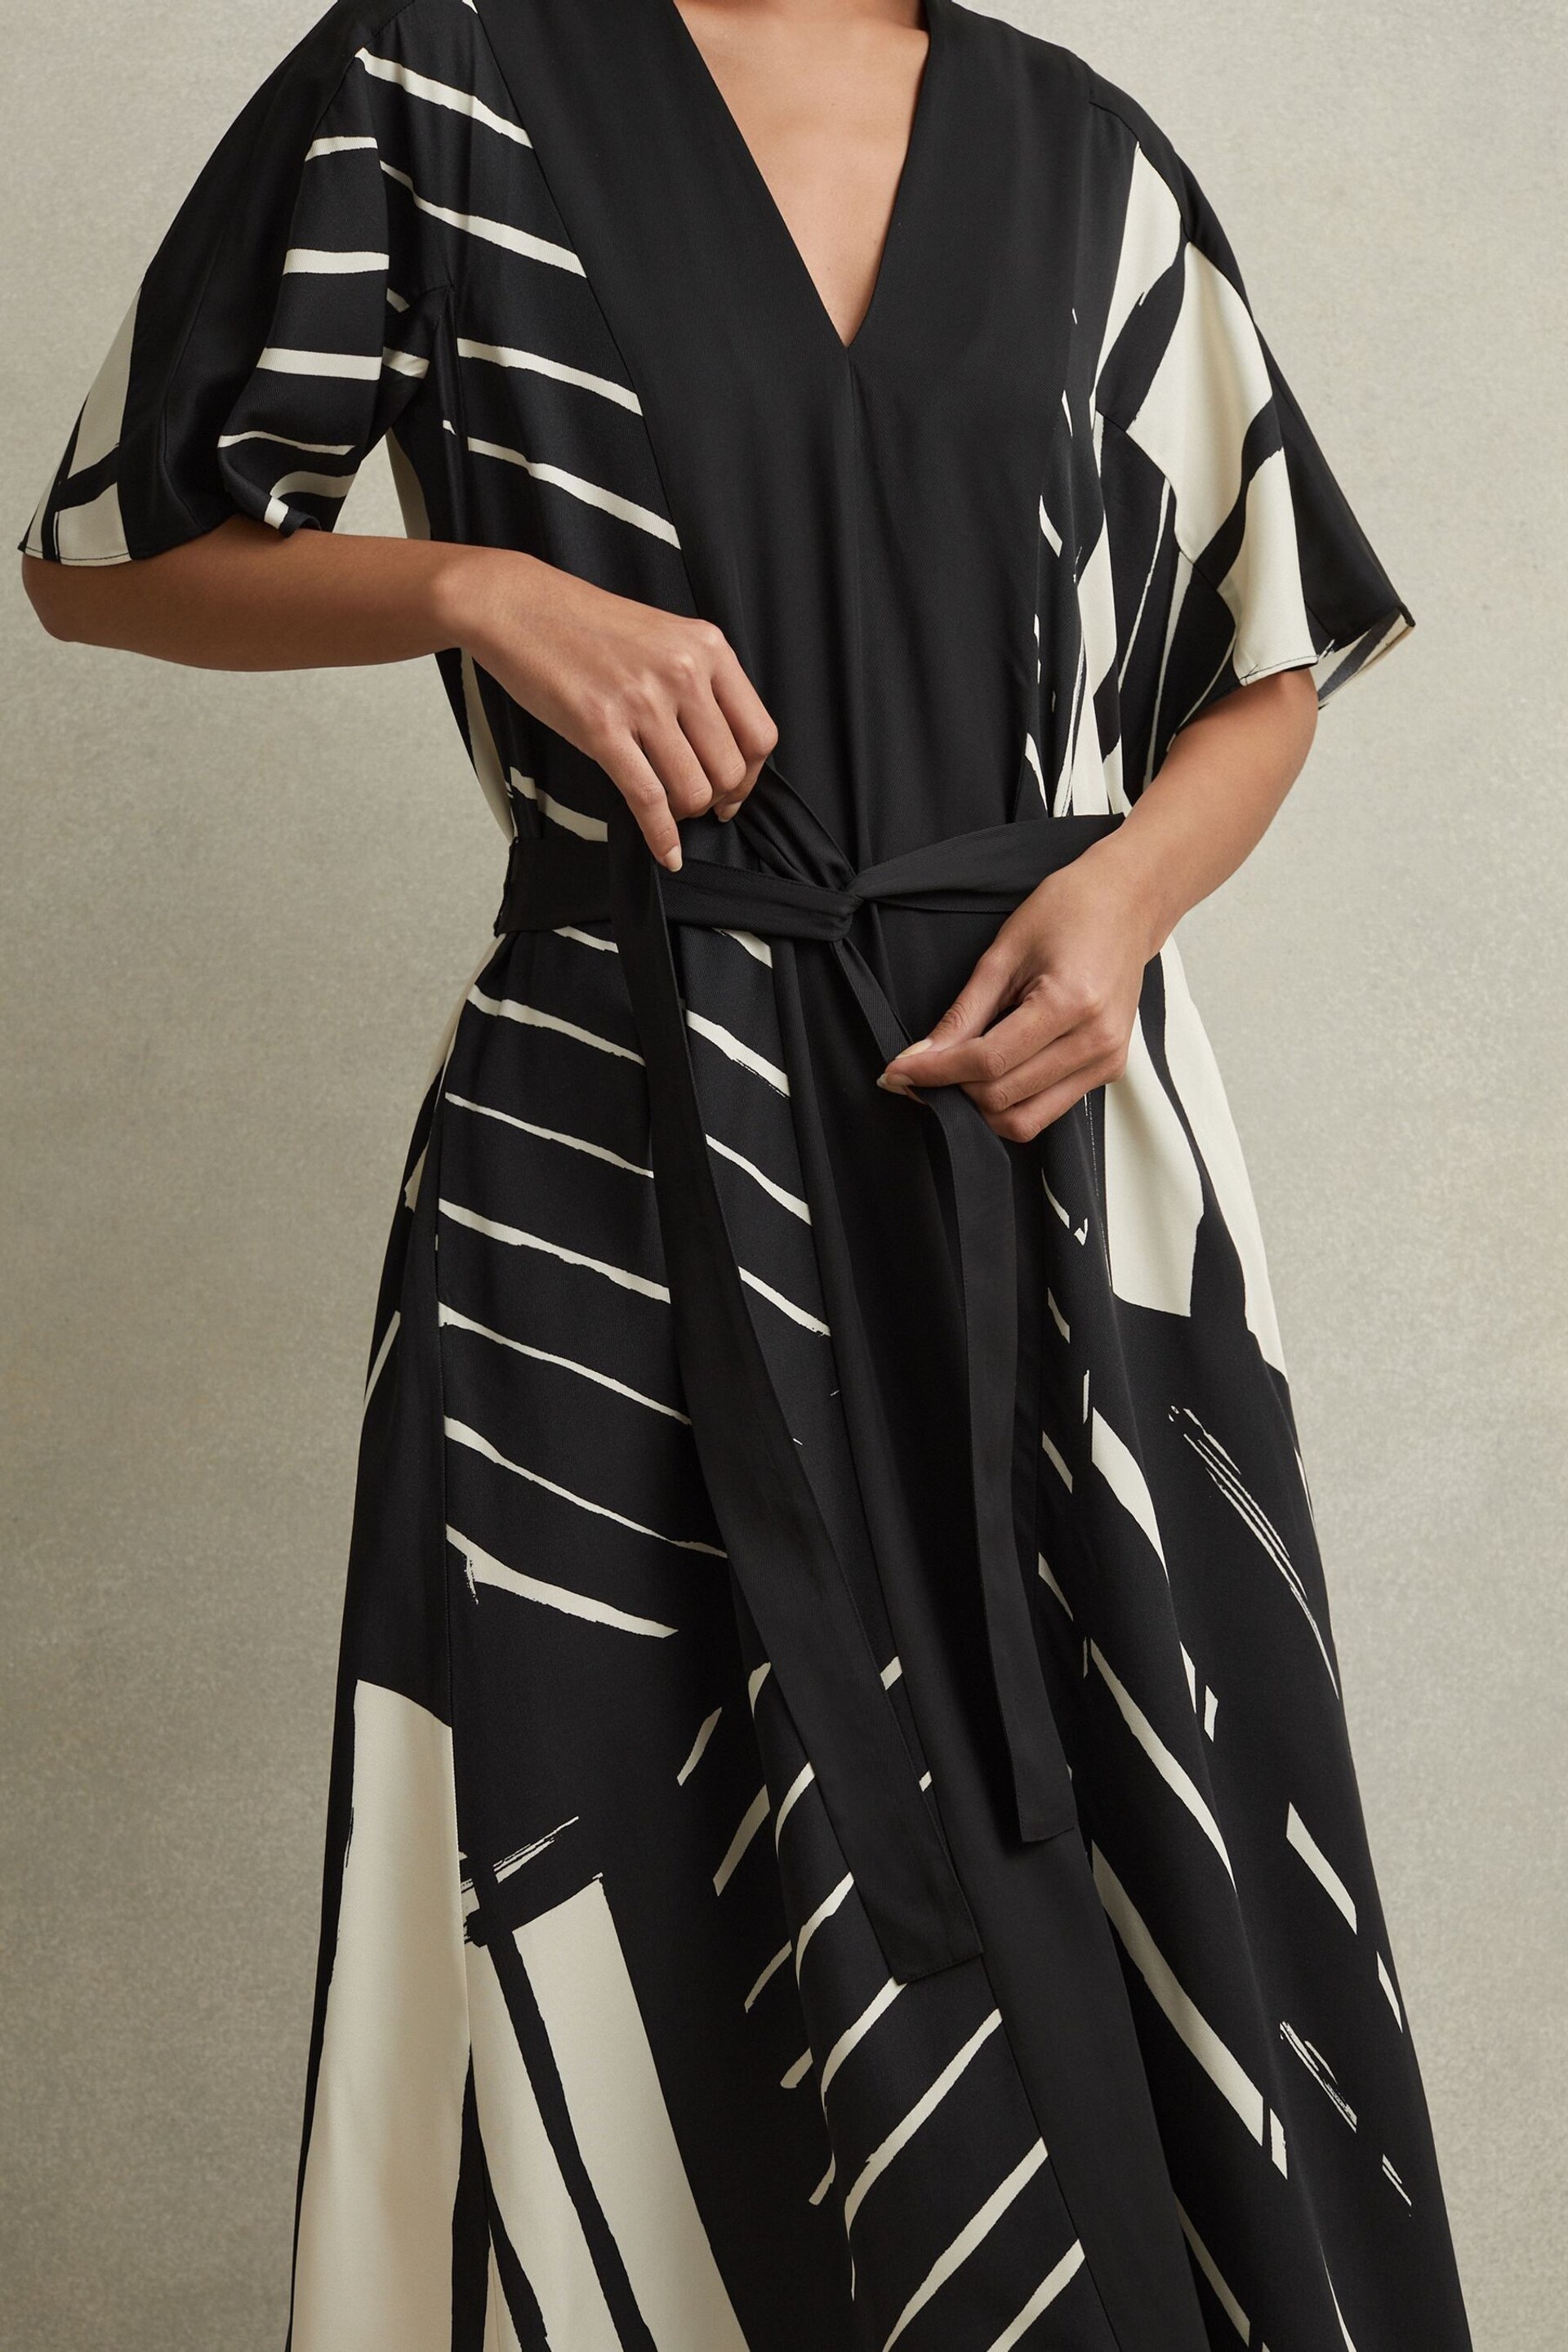 Reiss Black/White Cami Printed Fit and Flare Midi Dress - Image 3 of 7